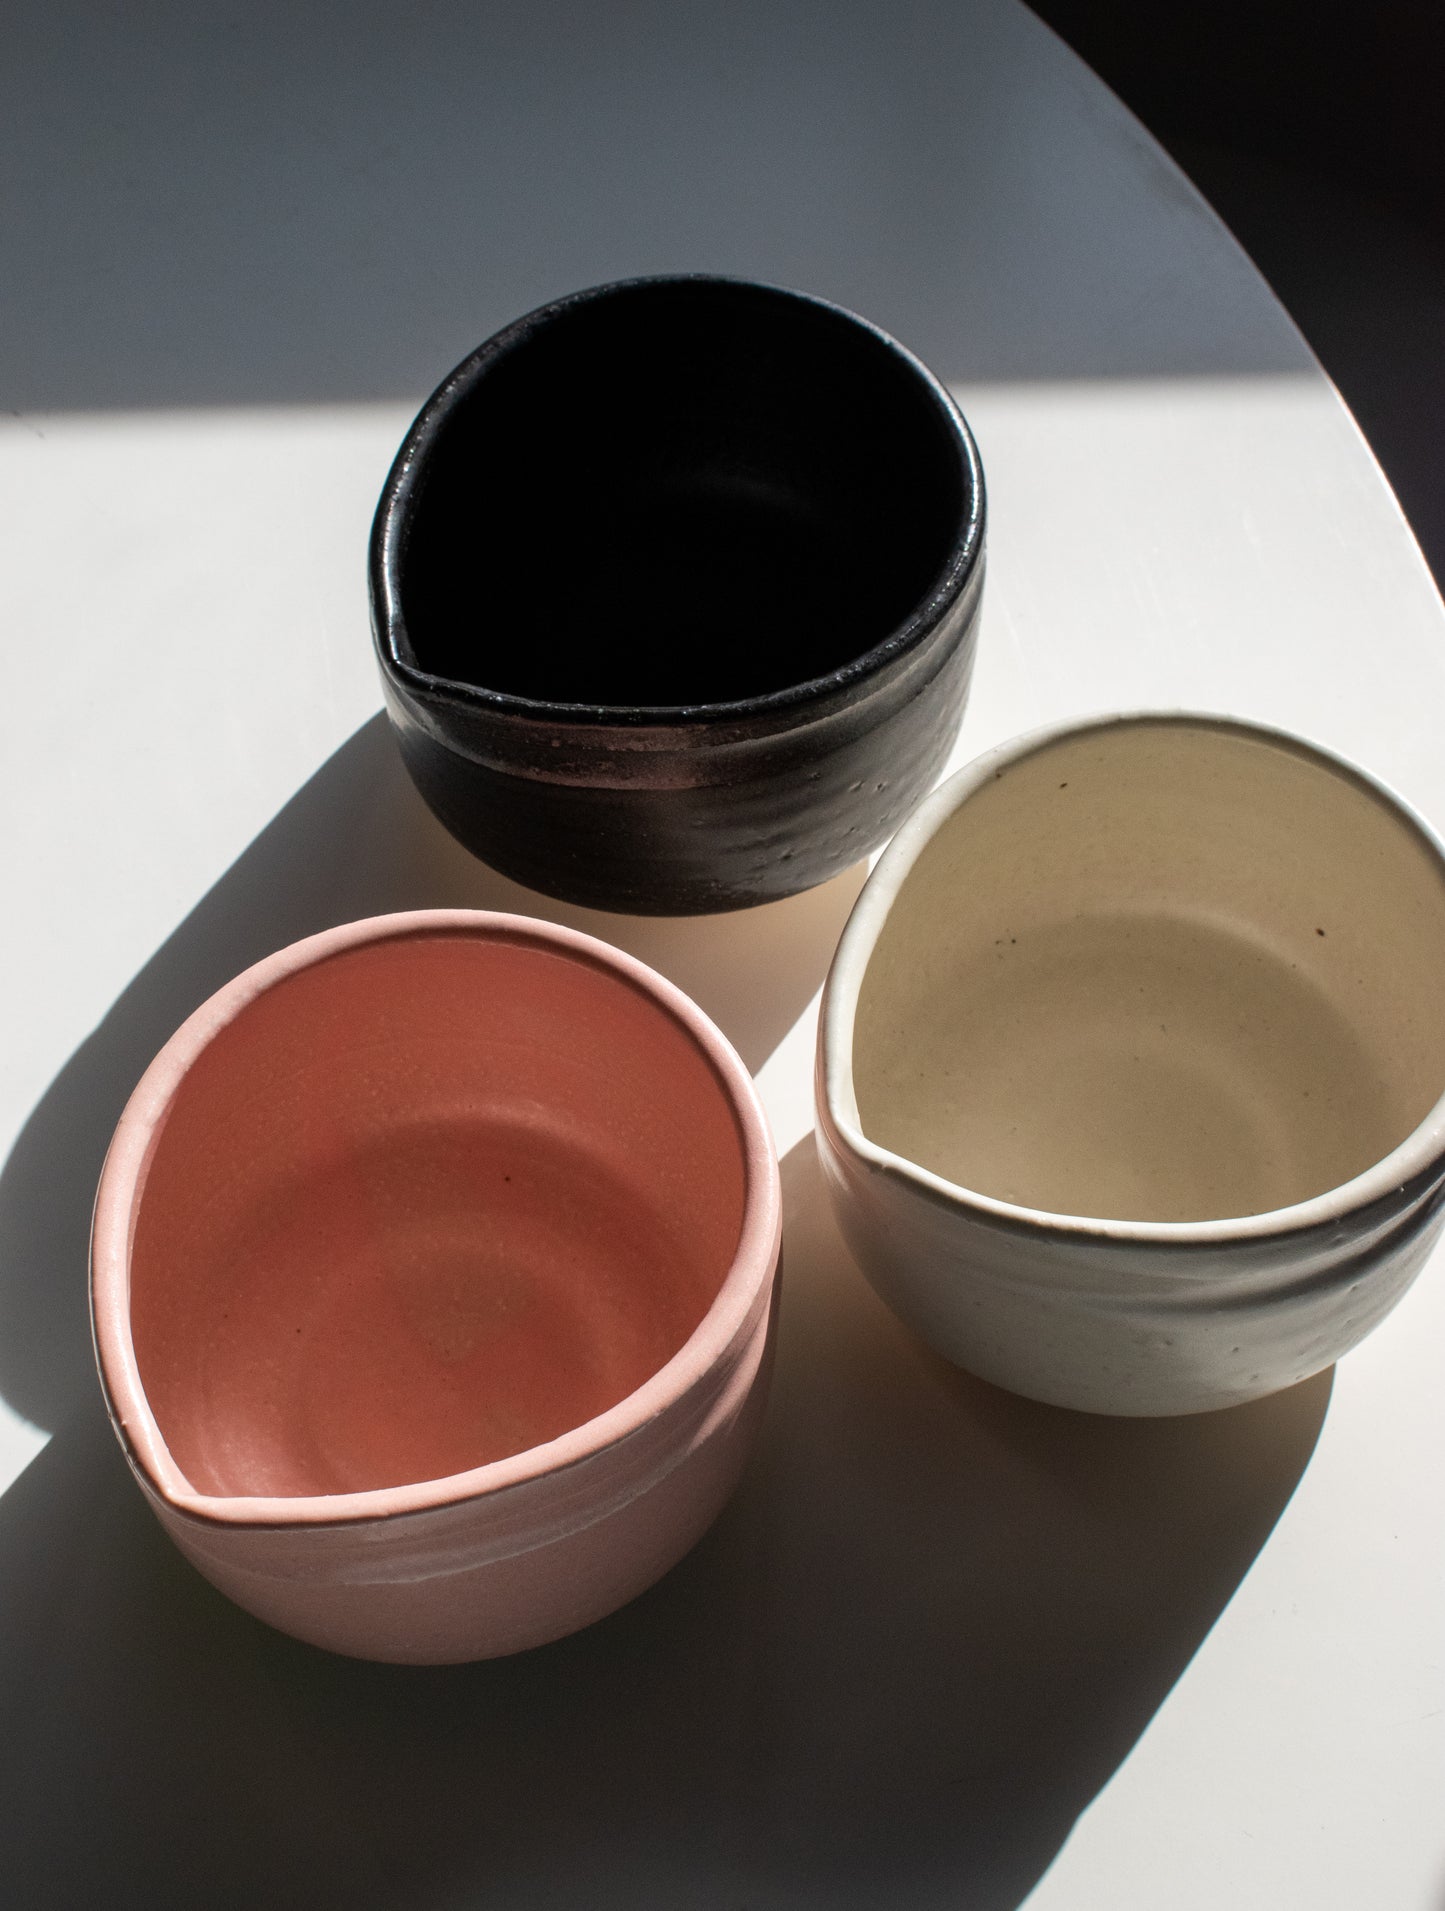 Pink Matcha Bowl with Spout